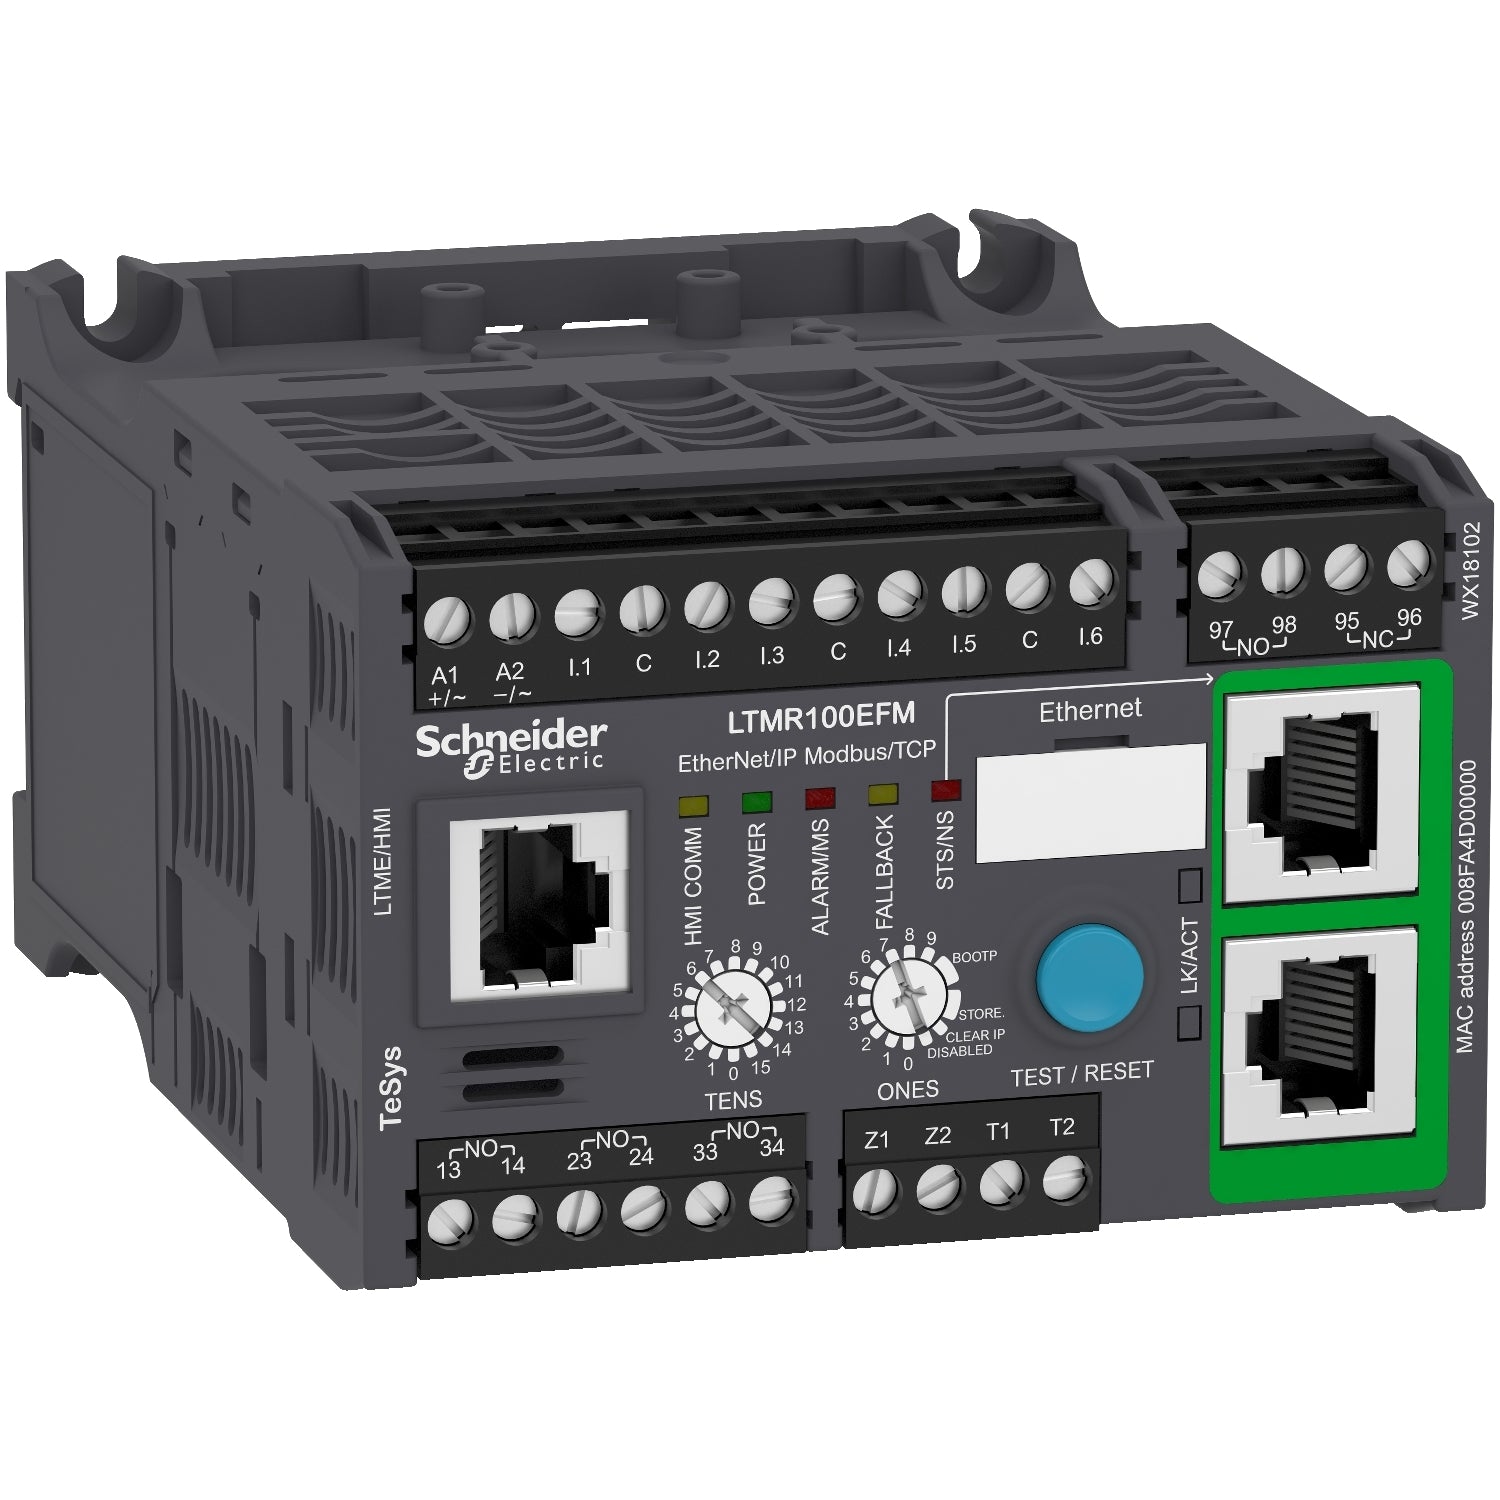 LTMR100EFM | Schneider Electric | Motor controller, TeSys T, Motor Management, Ethernet/IP, Modbus/TCP, 6 inputs, 3 outputs, 5 to 100A, 100 to 240VAC